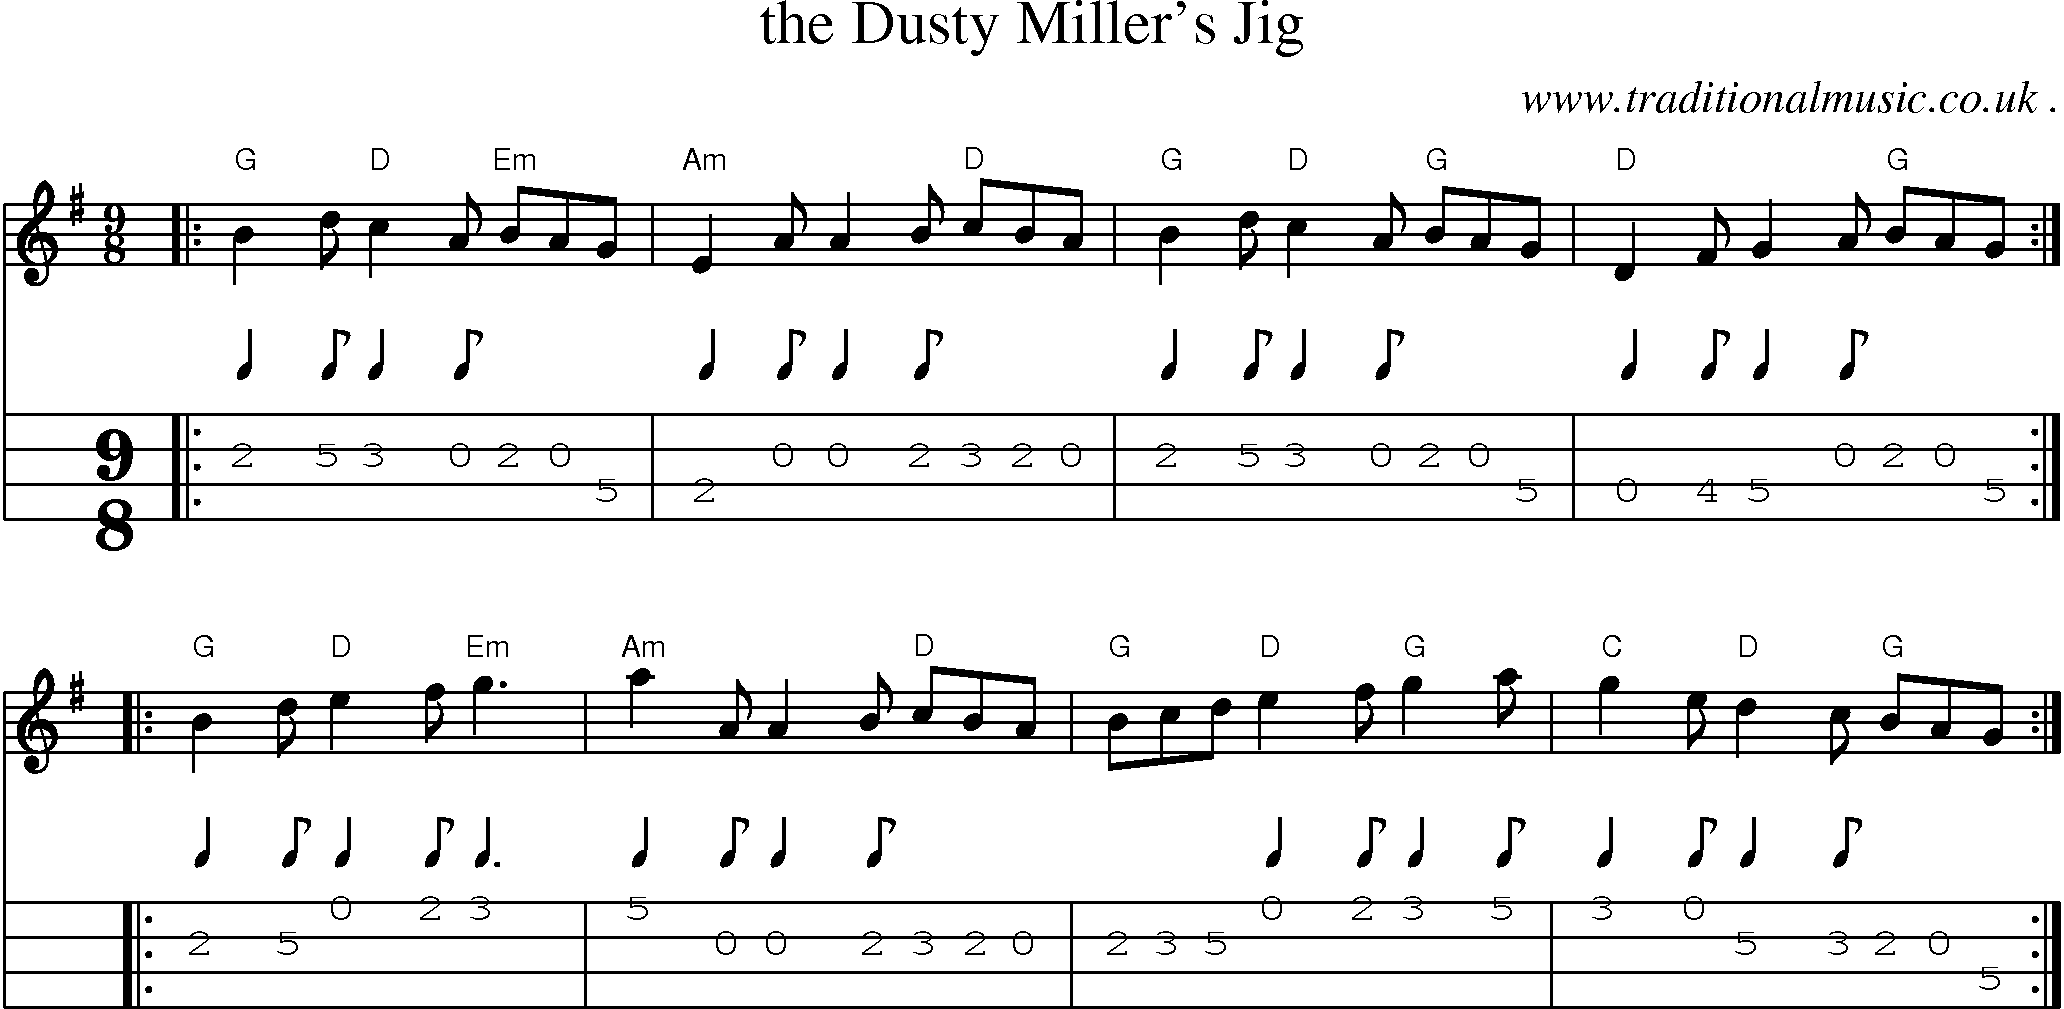 Sheet-music  score, Chords and Mandolin Tabs for The Dusty Millers Jig